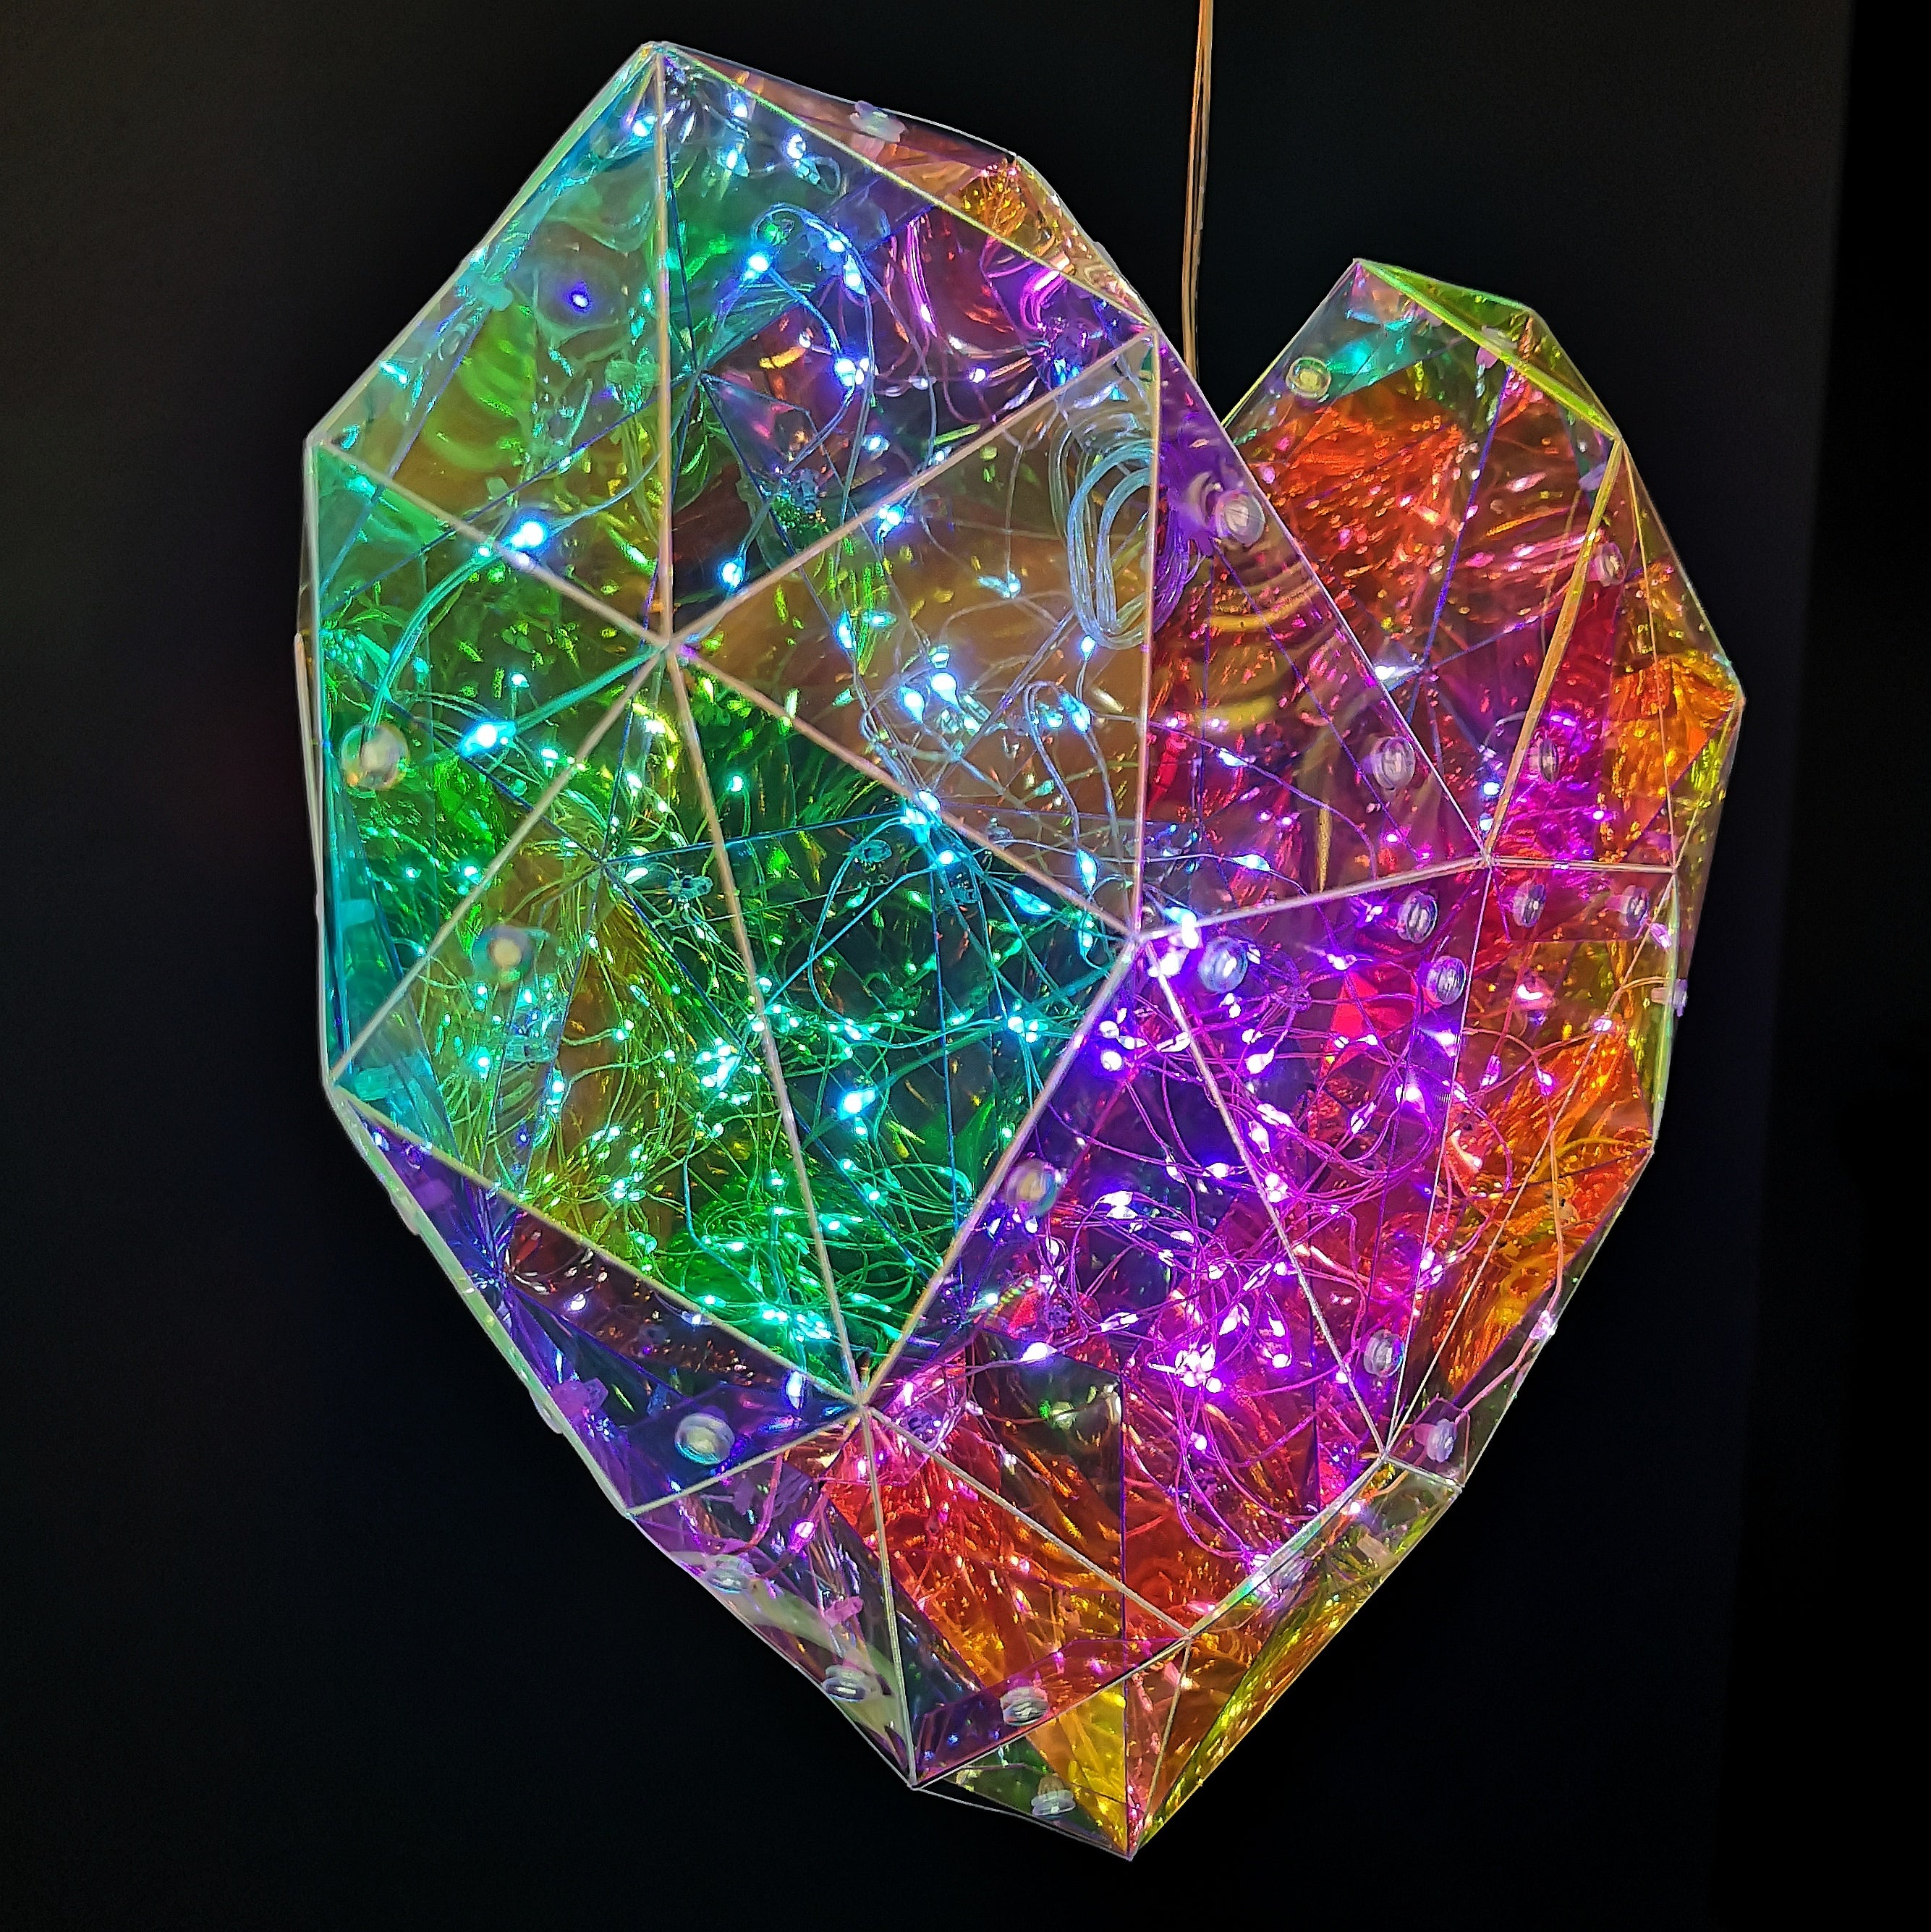 30cm Battery Operated Light up Hanging Christmas Dreamlight Heart with 100 White LEDs